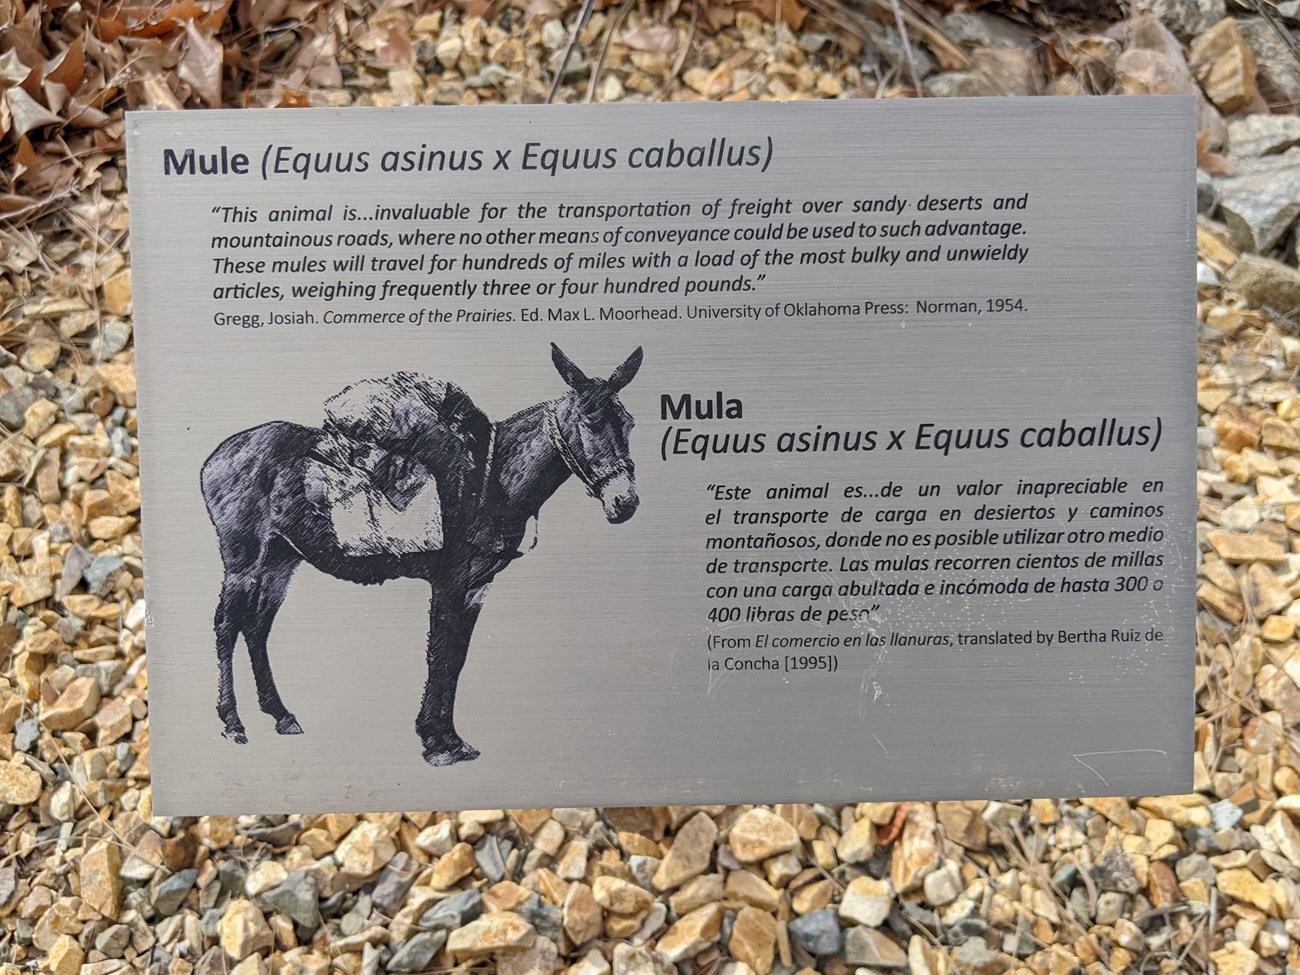 Image of a mule on a 10 inch by 8 inch metal exhibit sign. Giclee printed aluminum markers staked into ground along upper sidewalk (high road) next to the school and playground.